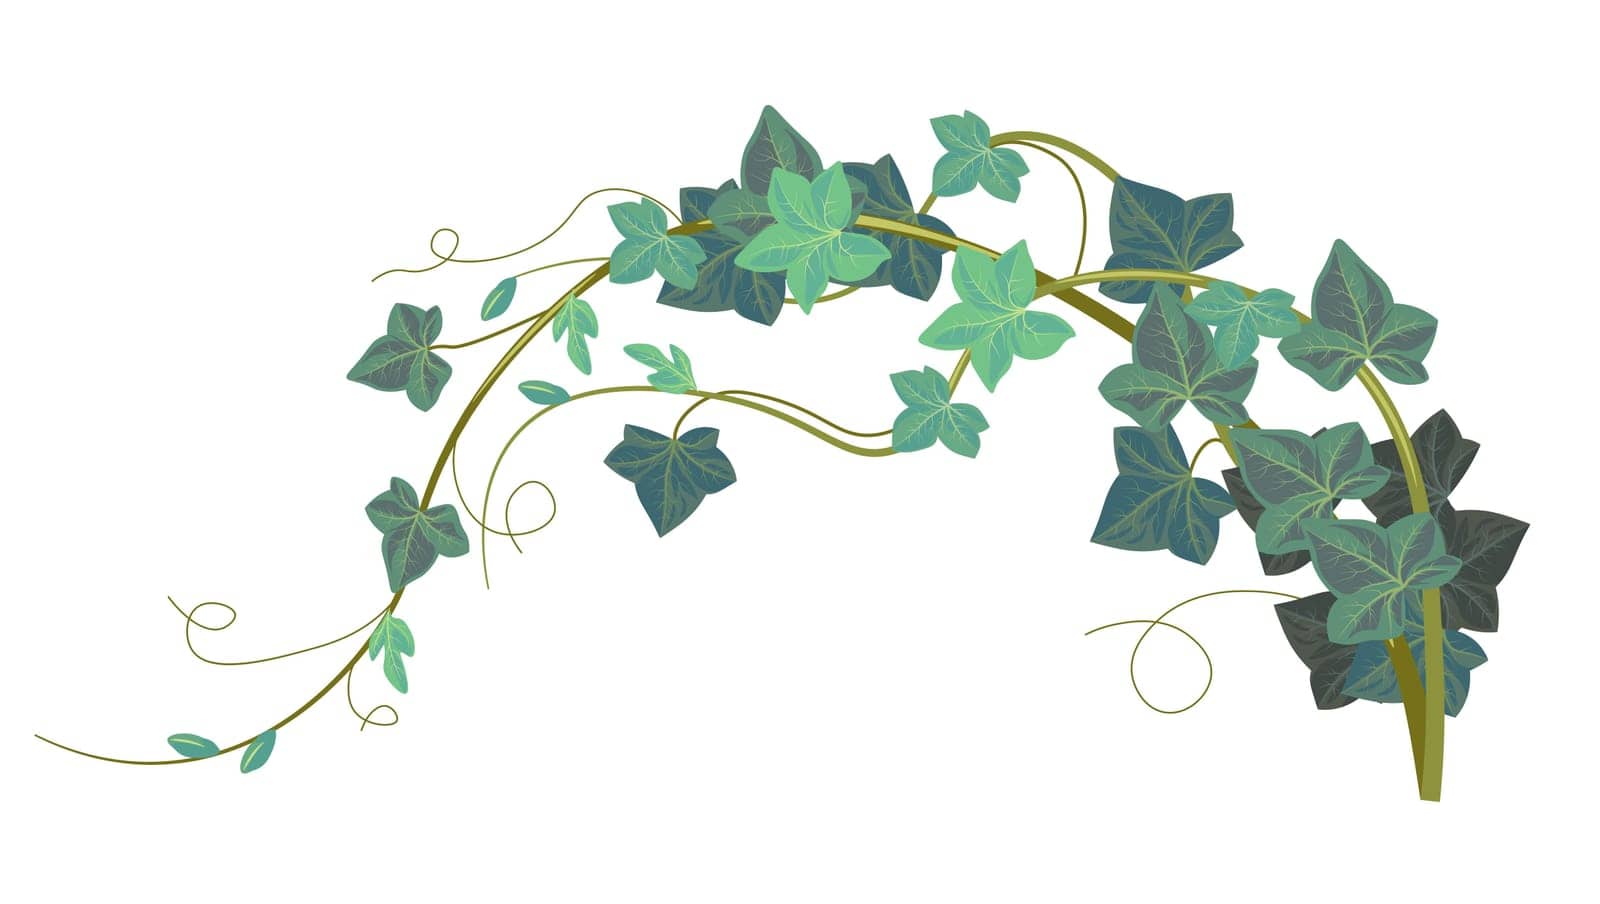 Hedera exotic evergreen flora, isolated ivy climbing plant. Foliage and leaves botany diversity. Branches and twigs with leafage. Tropical forest or park decoration. Vector in flat style illustration